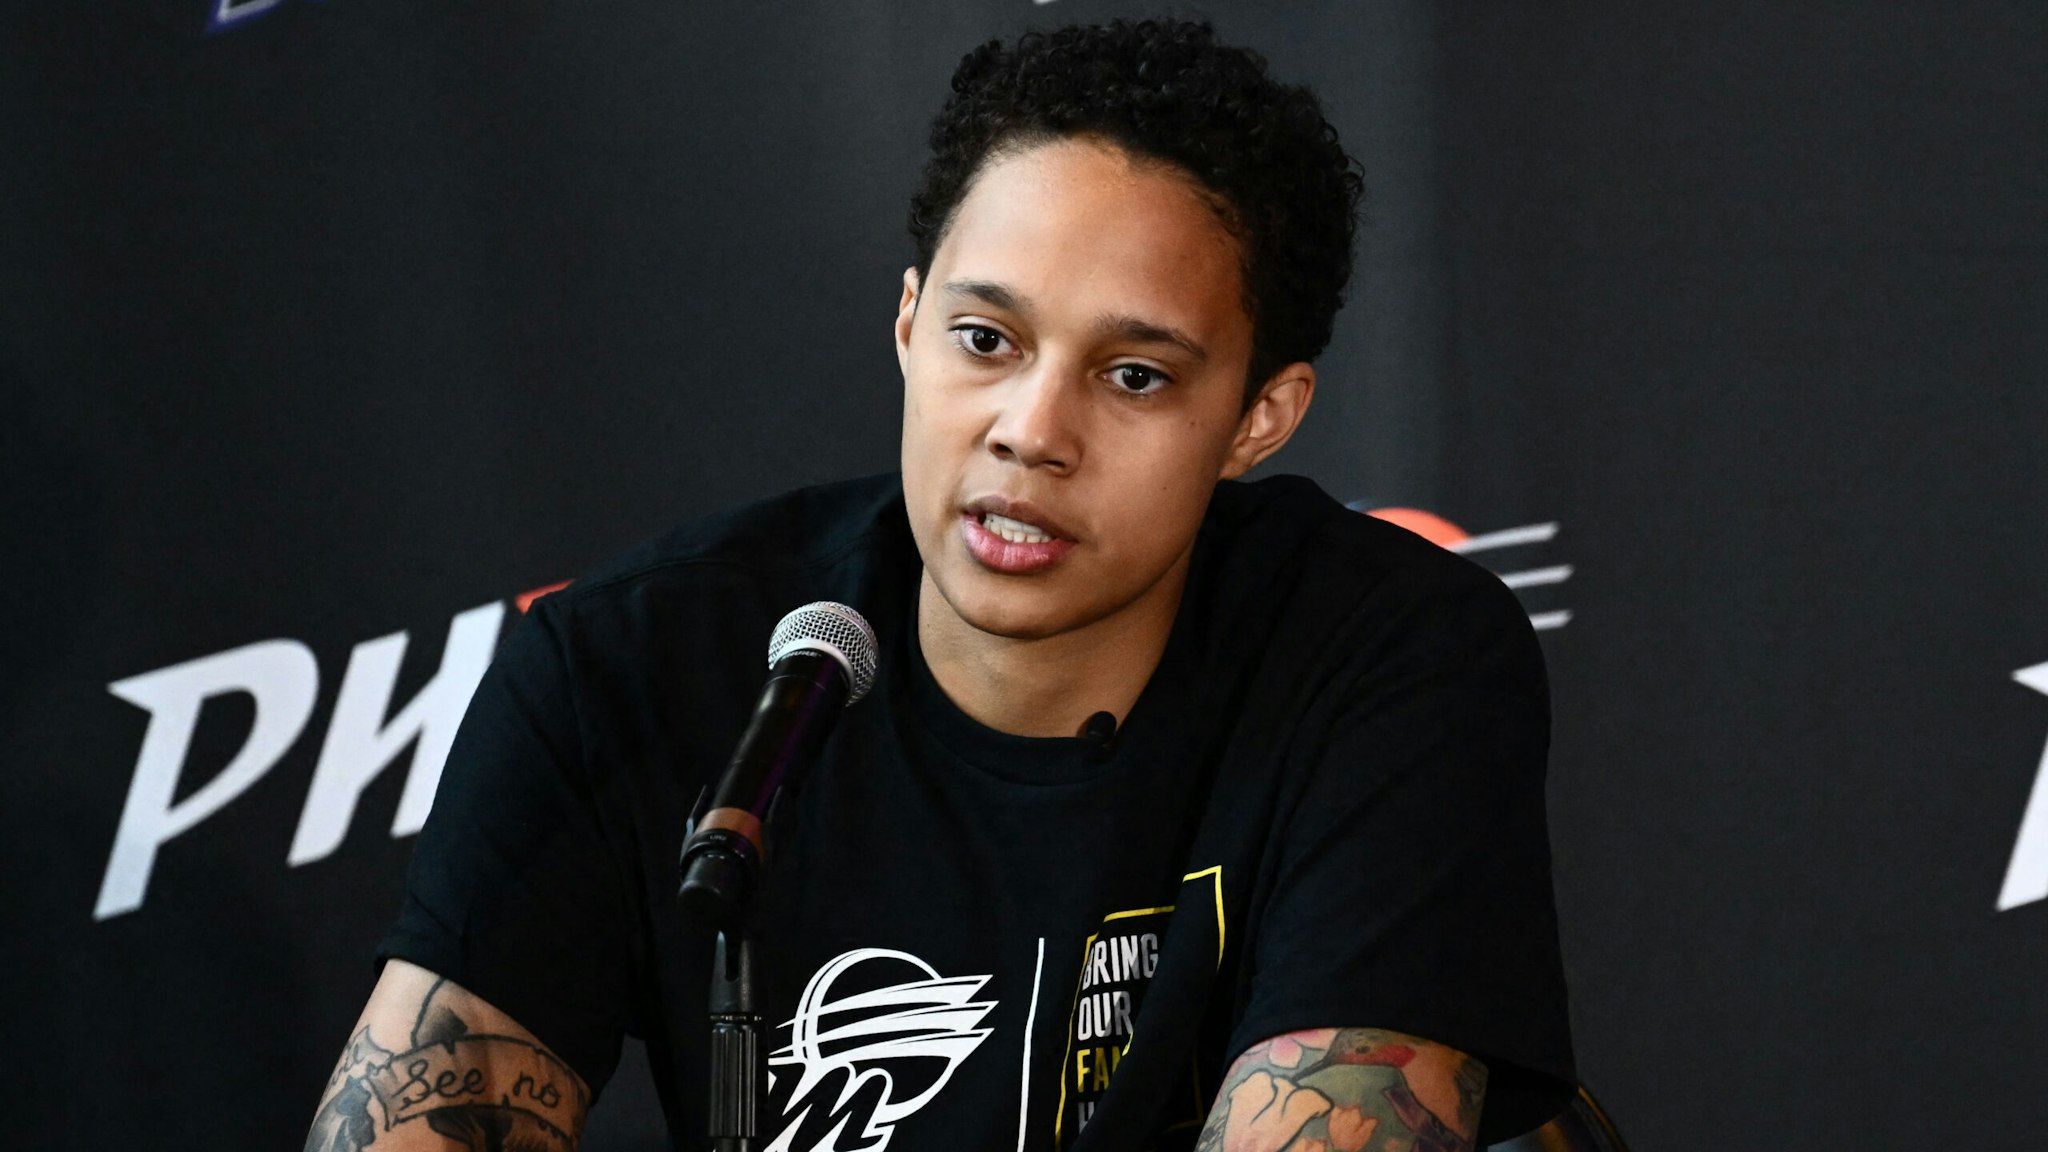 US basketball player Brittney Griner, of the Phoenix Mercury, speaks during a news conference at the Footprint Center in Phoenix, Arizona on April 27, 2023. - Griner vowed never to play basketball overseas again in an emotional first press conference since being released by Russia as part of a prisoner swap last year. Speaking in Arizona as she prepares to resume her career with the Phoenix Mercury, Griner pledged to keep fighting on behalf of people wrongfully detained around the world.